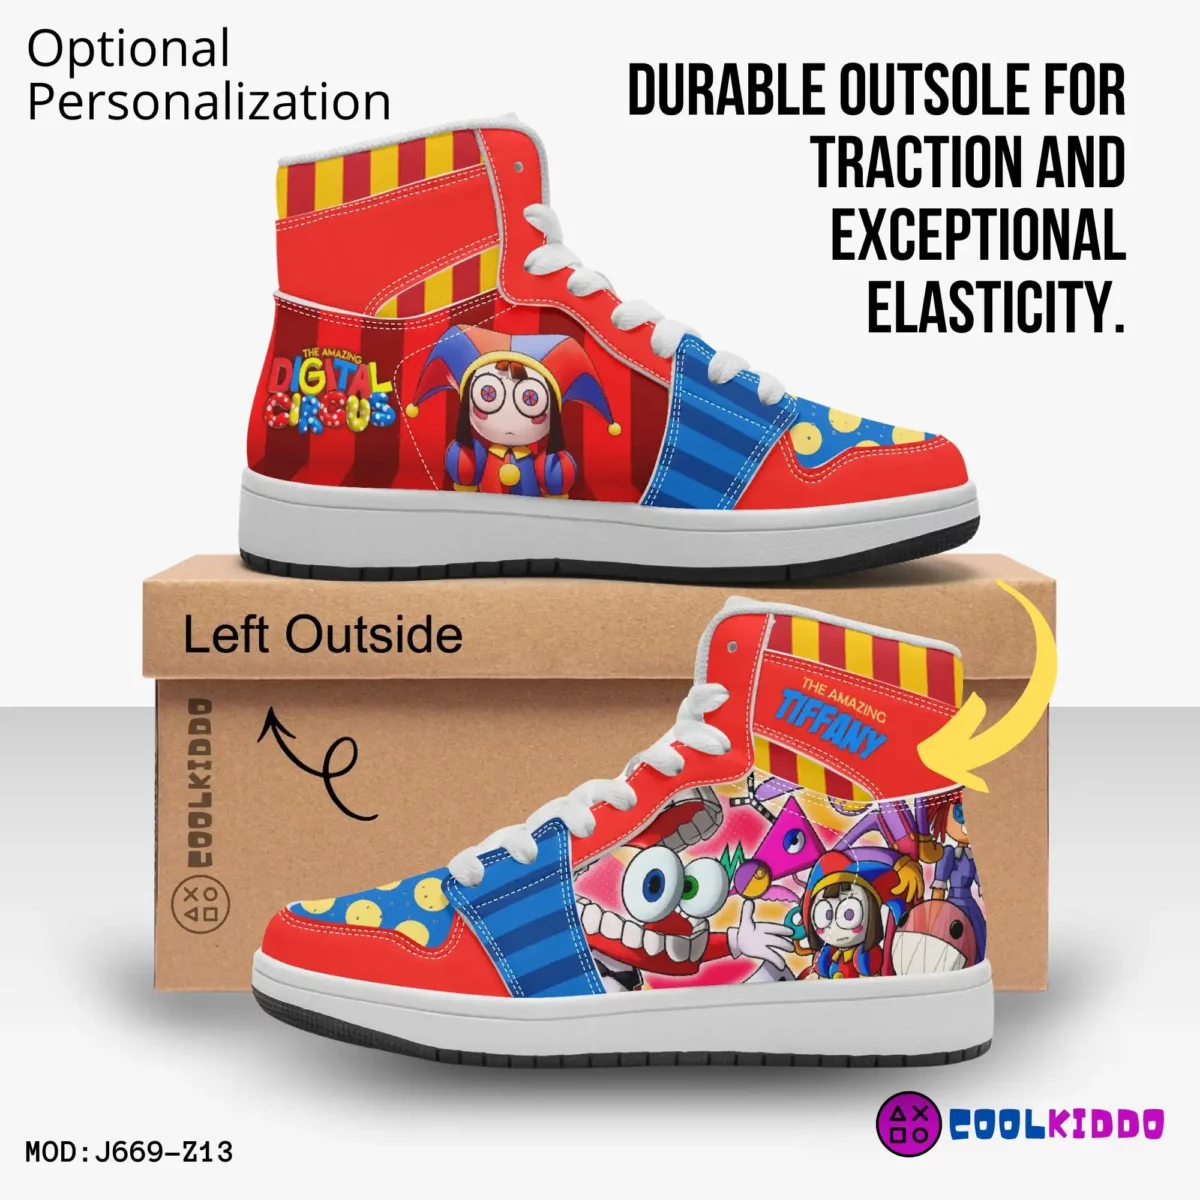 Personalized Name The Amazing Digital Circus Inspired High-Top Shoes, Leather Sneakers for Kids Cool Kiddo 16